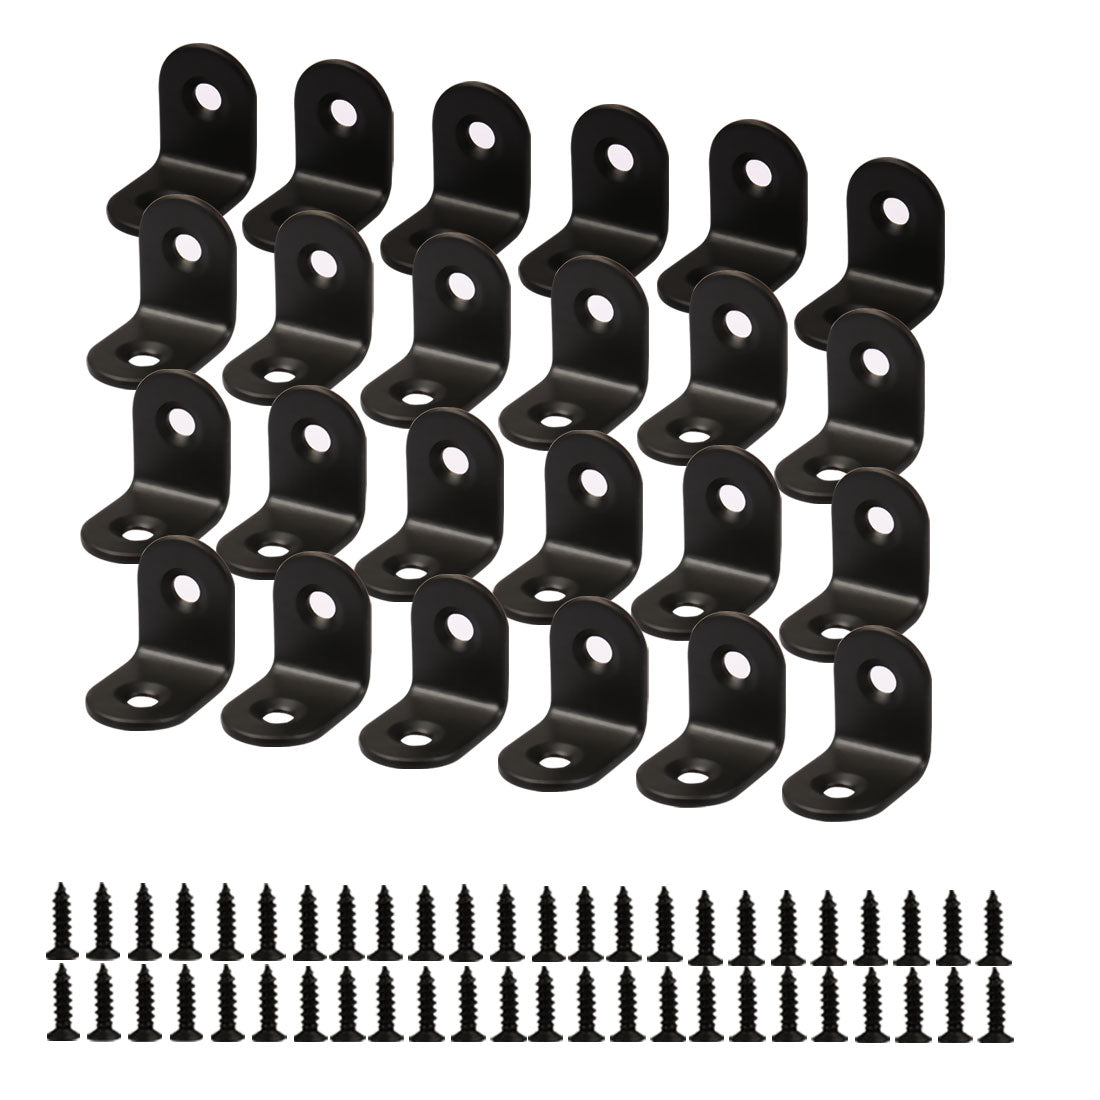 uxcell Uxcell Angle Bracket Stainless Steel Black Brace Support w Screws 20 x 20mm, 24pcs